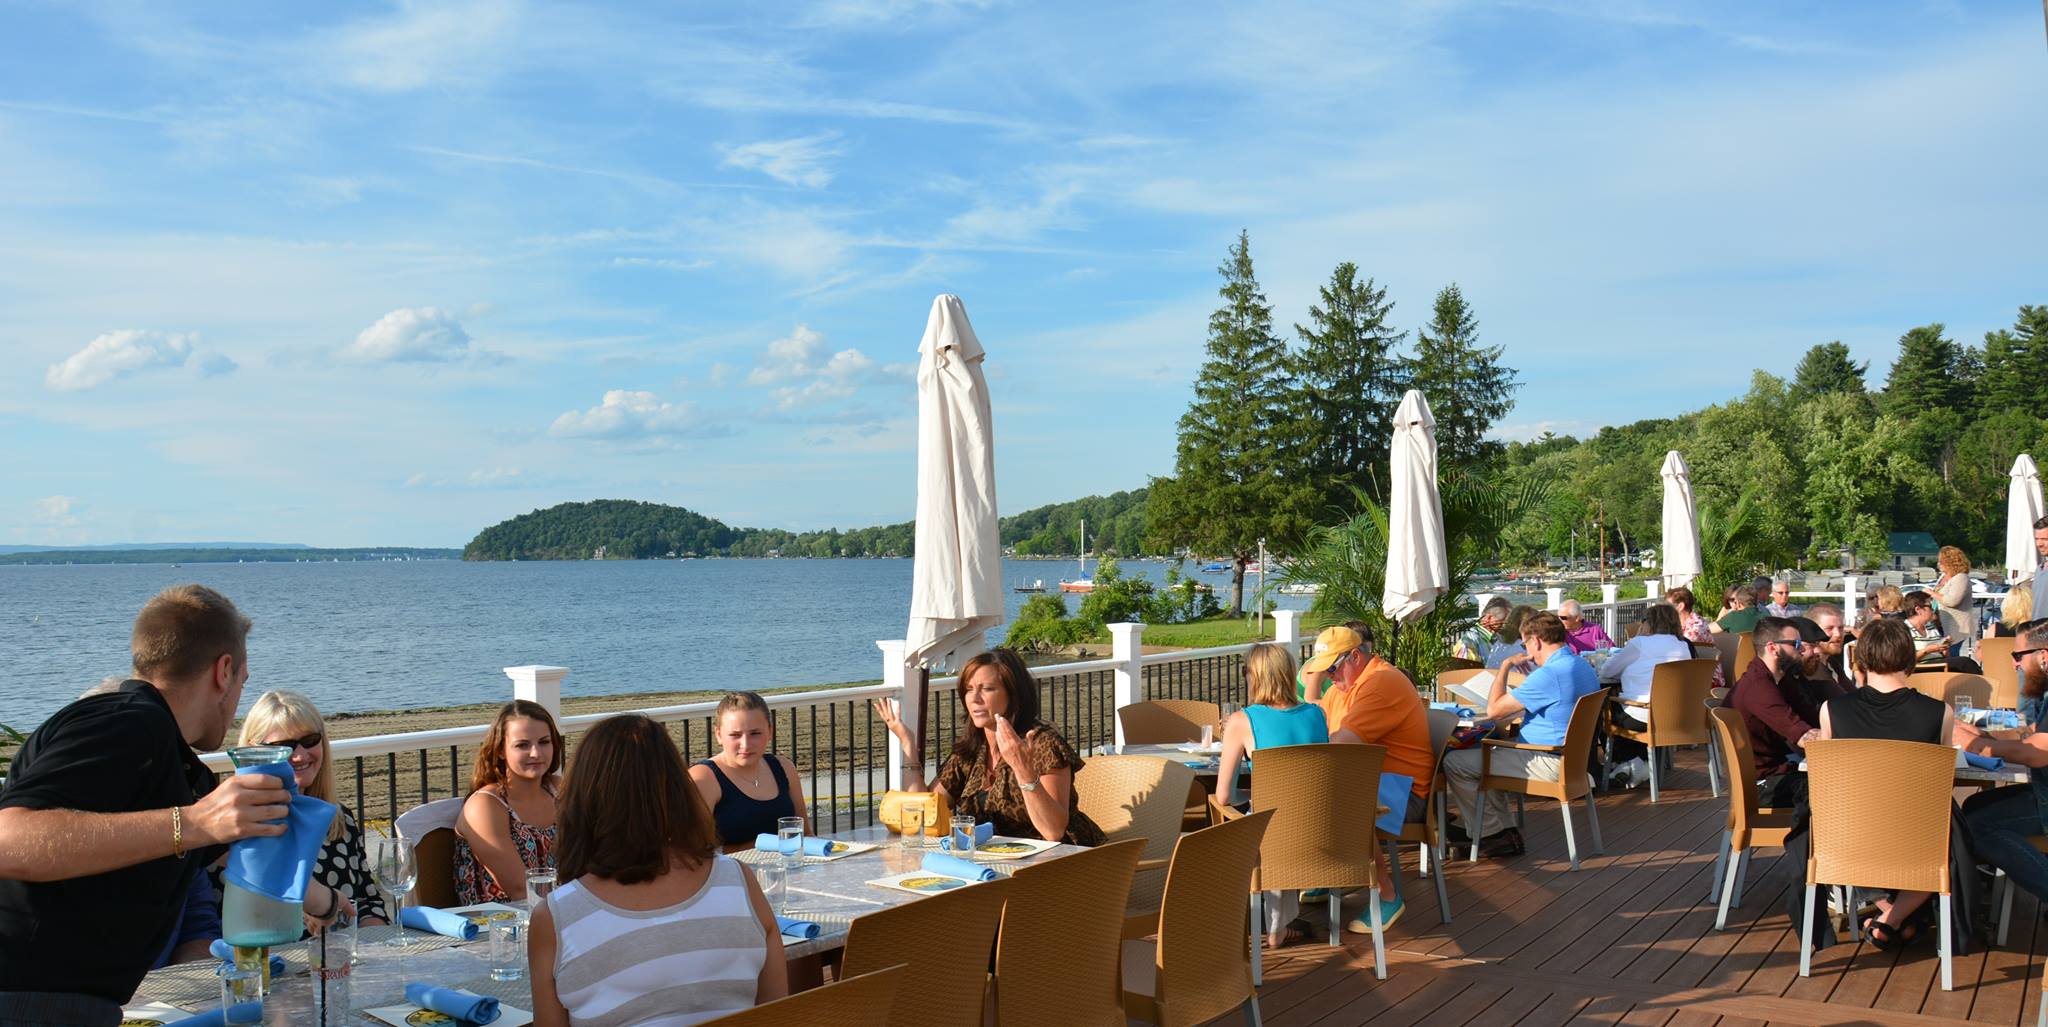 Waterfront restaurant patio with people sitting at the tables